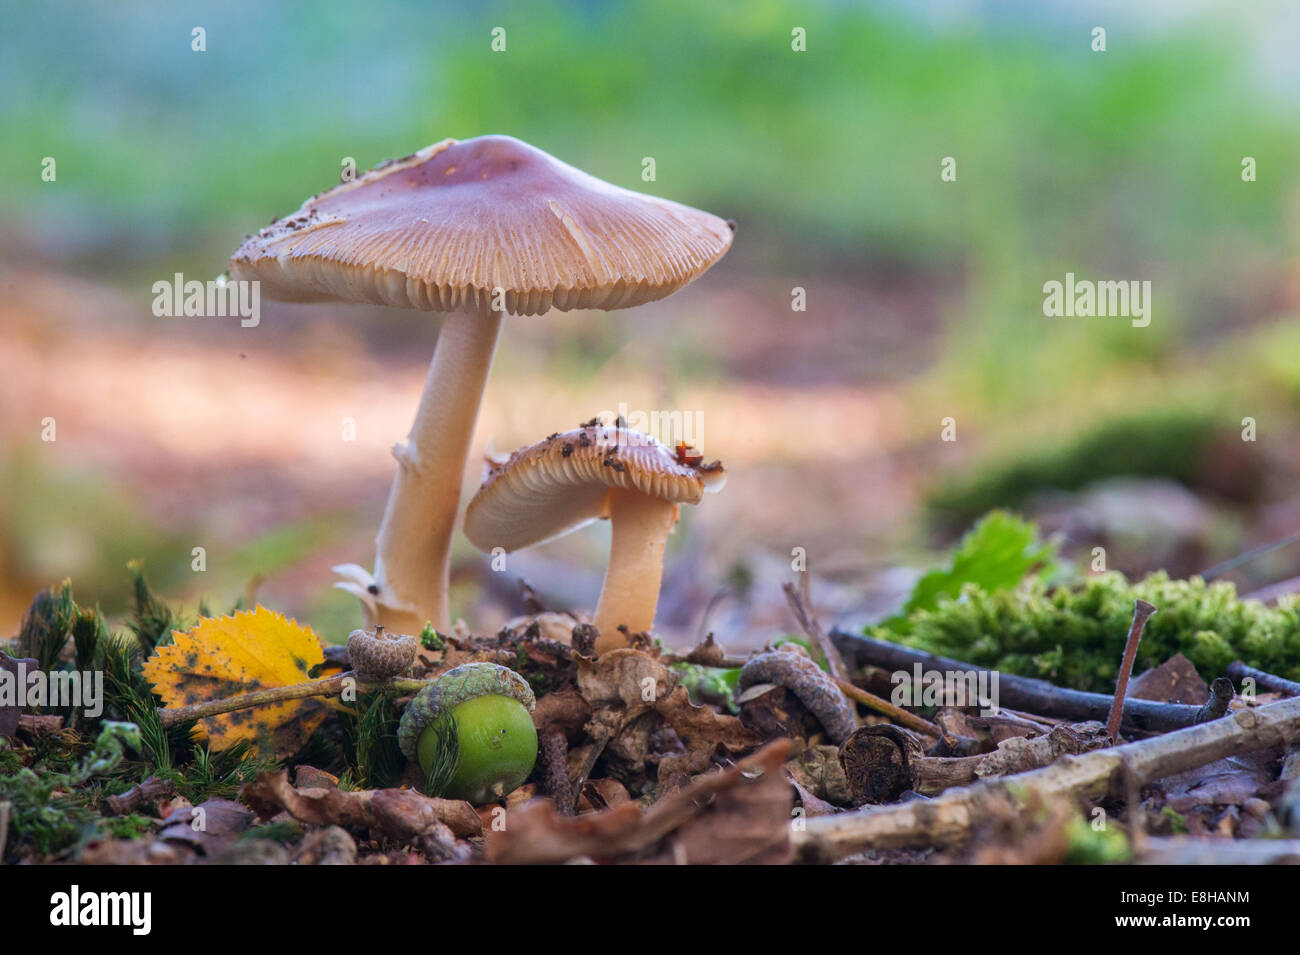 Mushrooms in nature with acorn Stock Photo